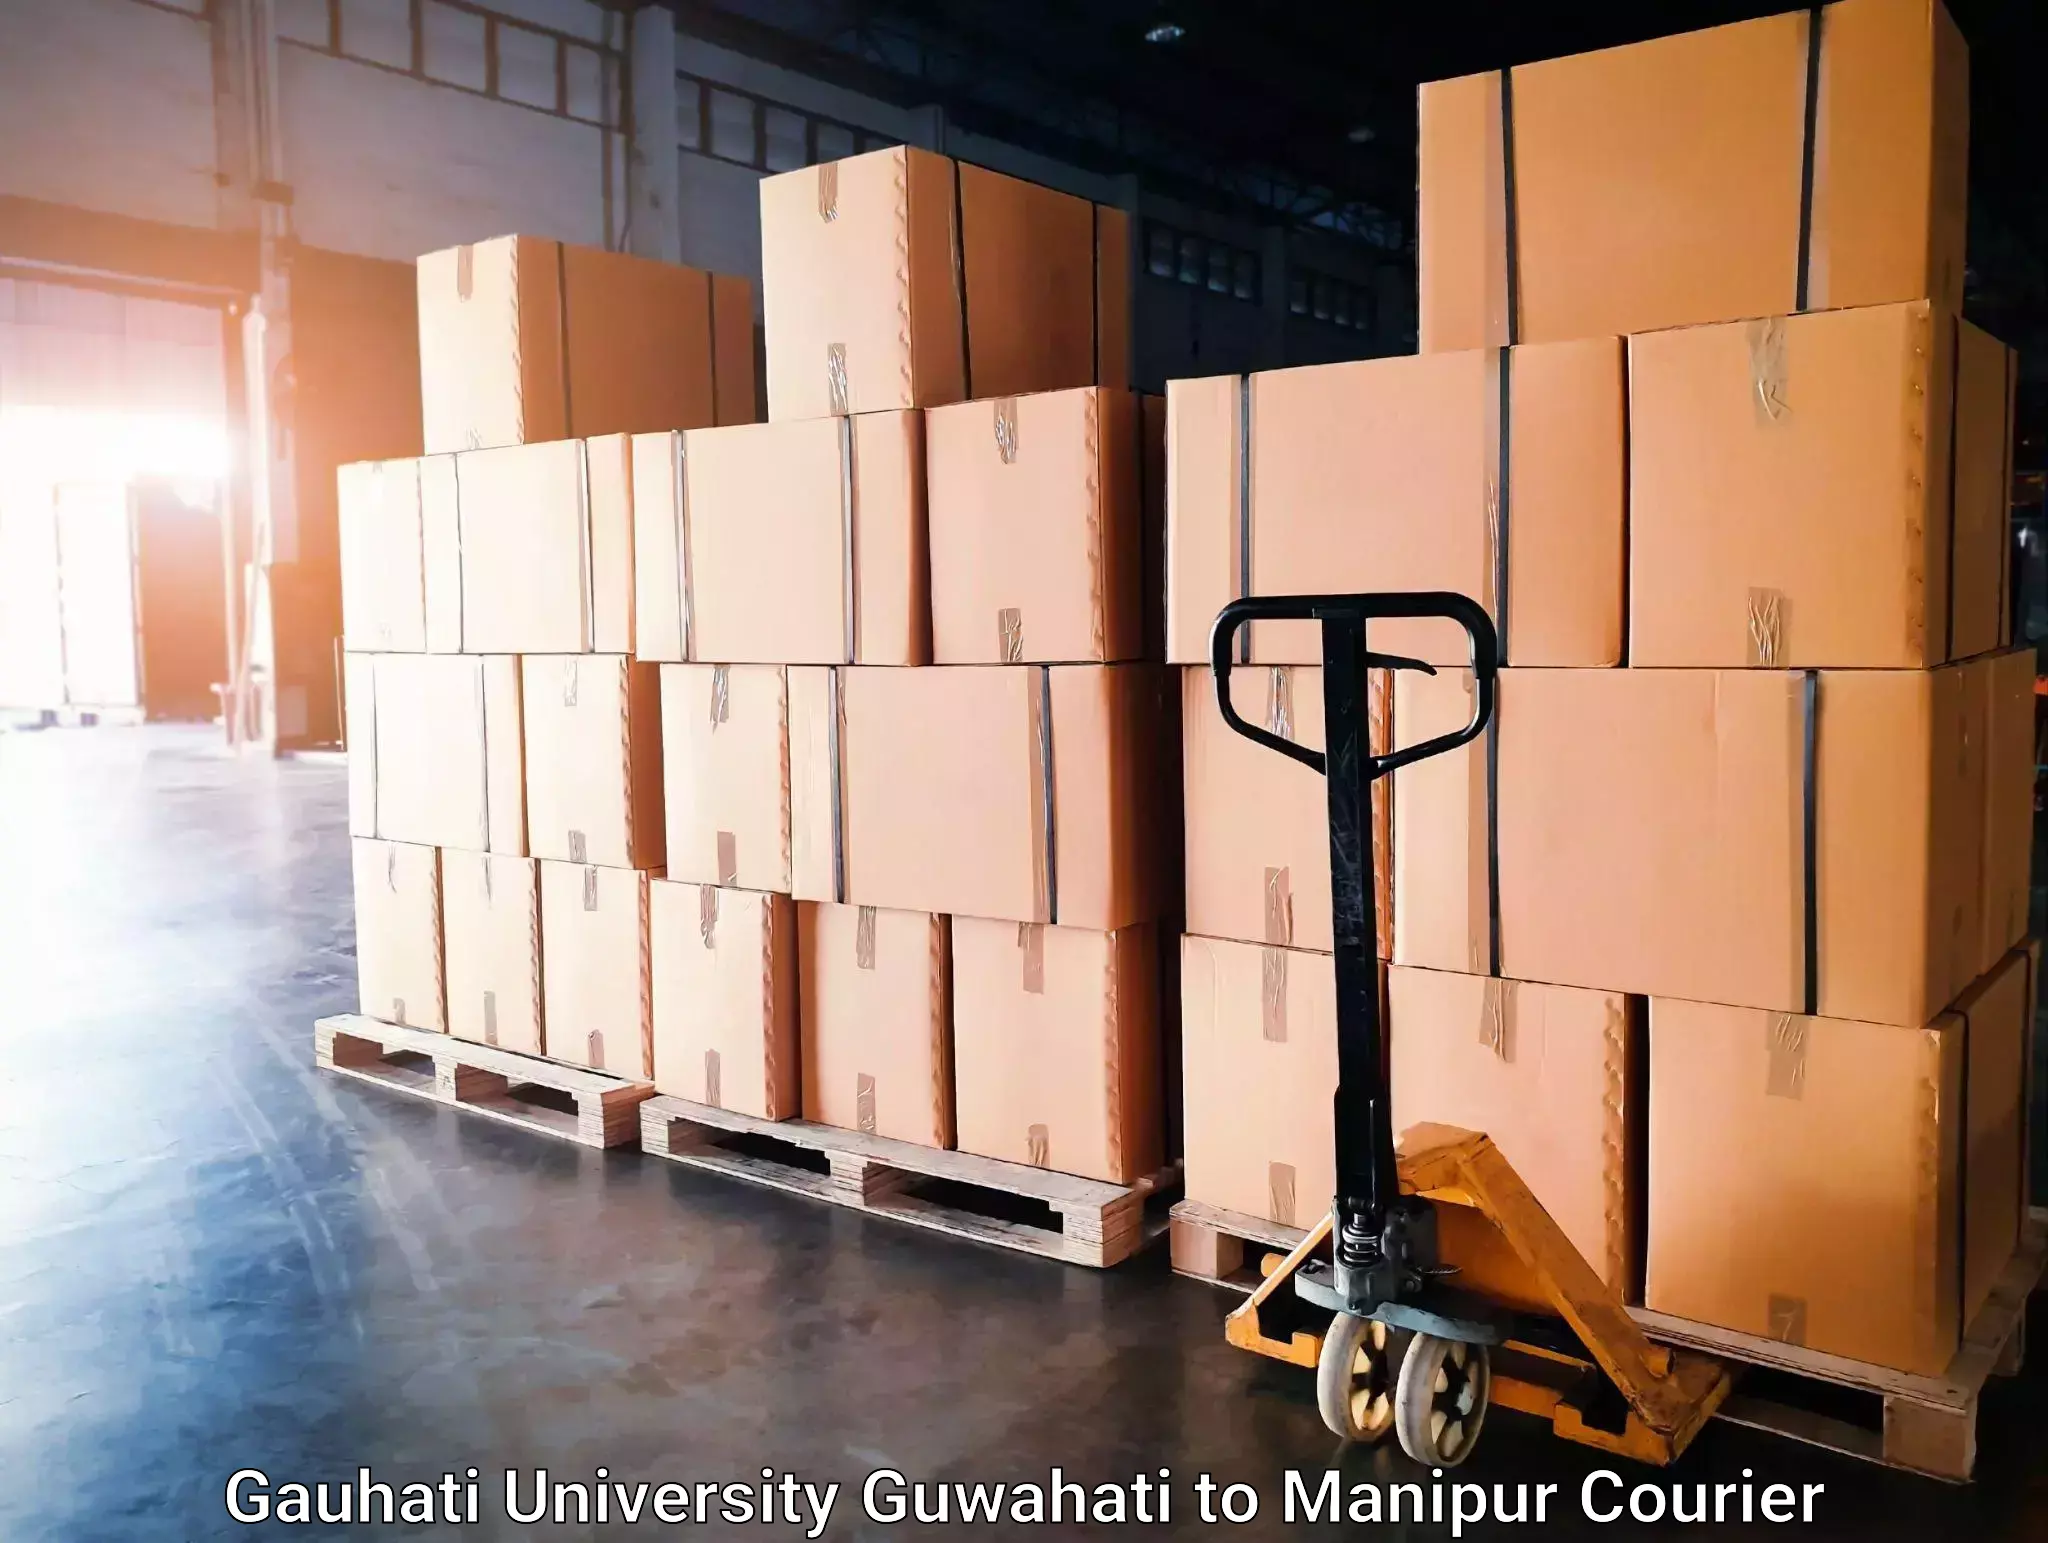 24-hour courier services in Gauhati University Guwahati to Imphal